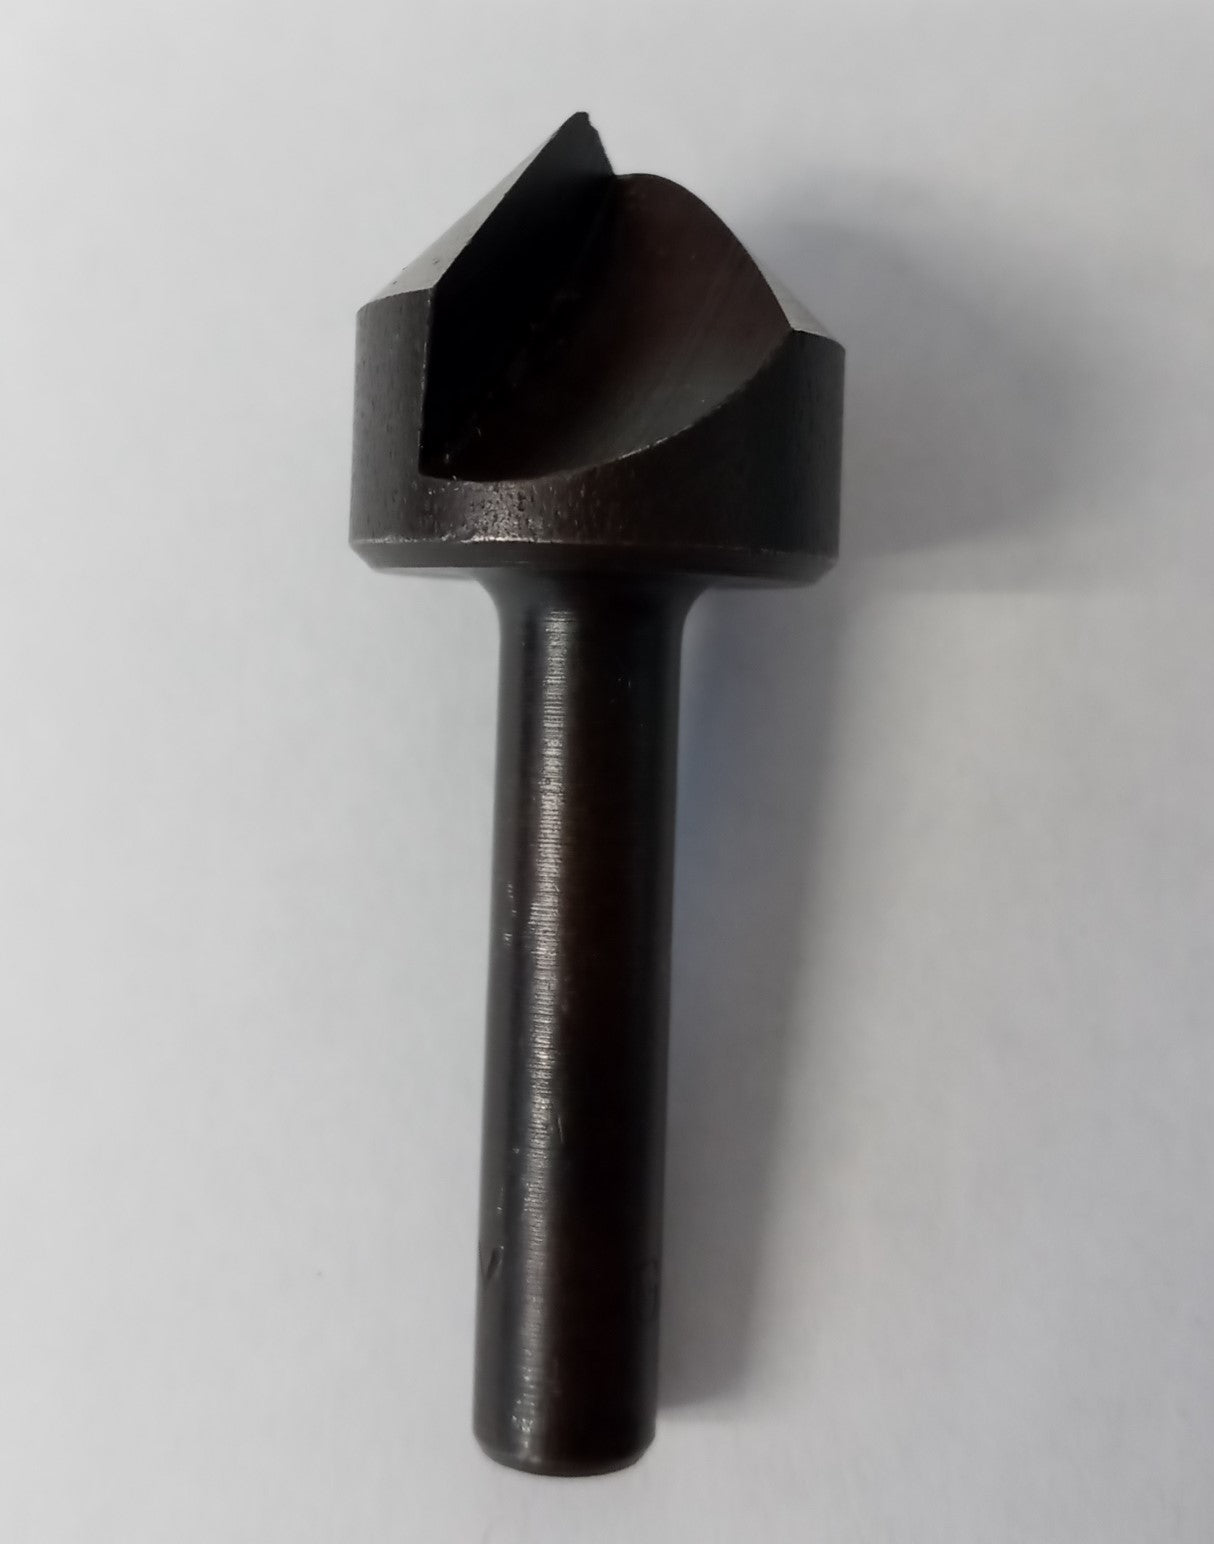 Wolfcraft 2502 5/8" Countersink Made in Germany